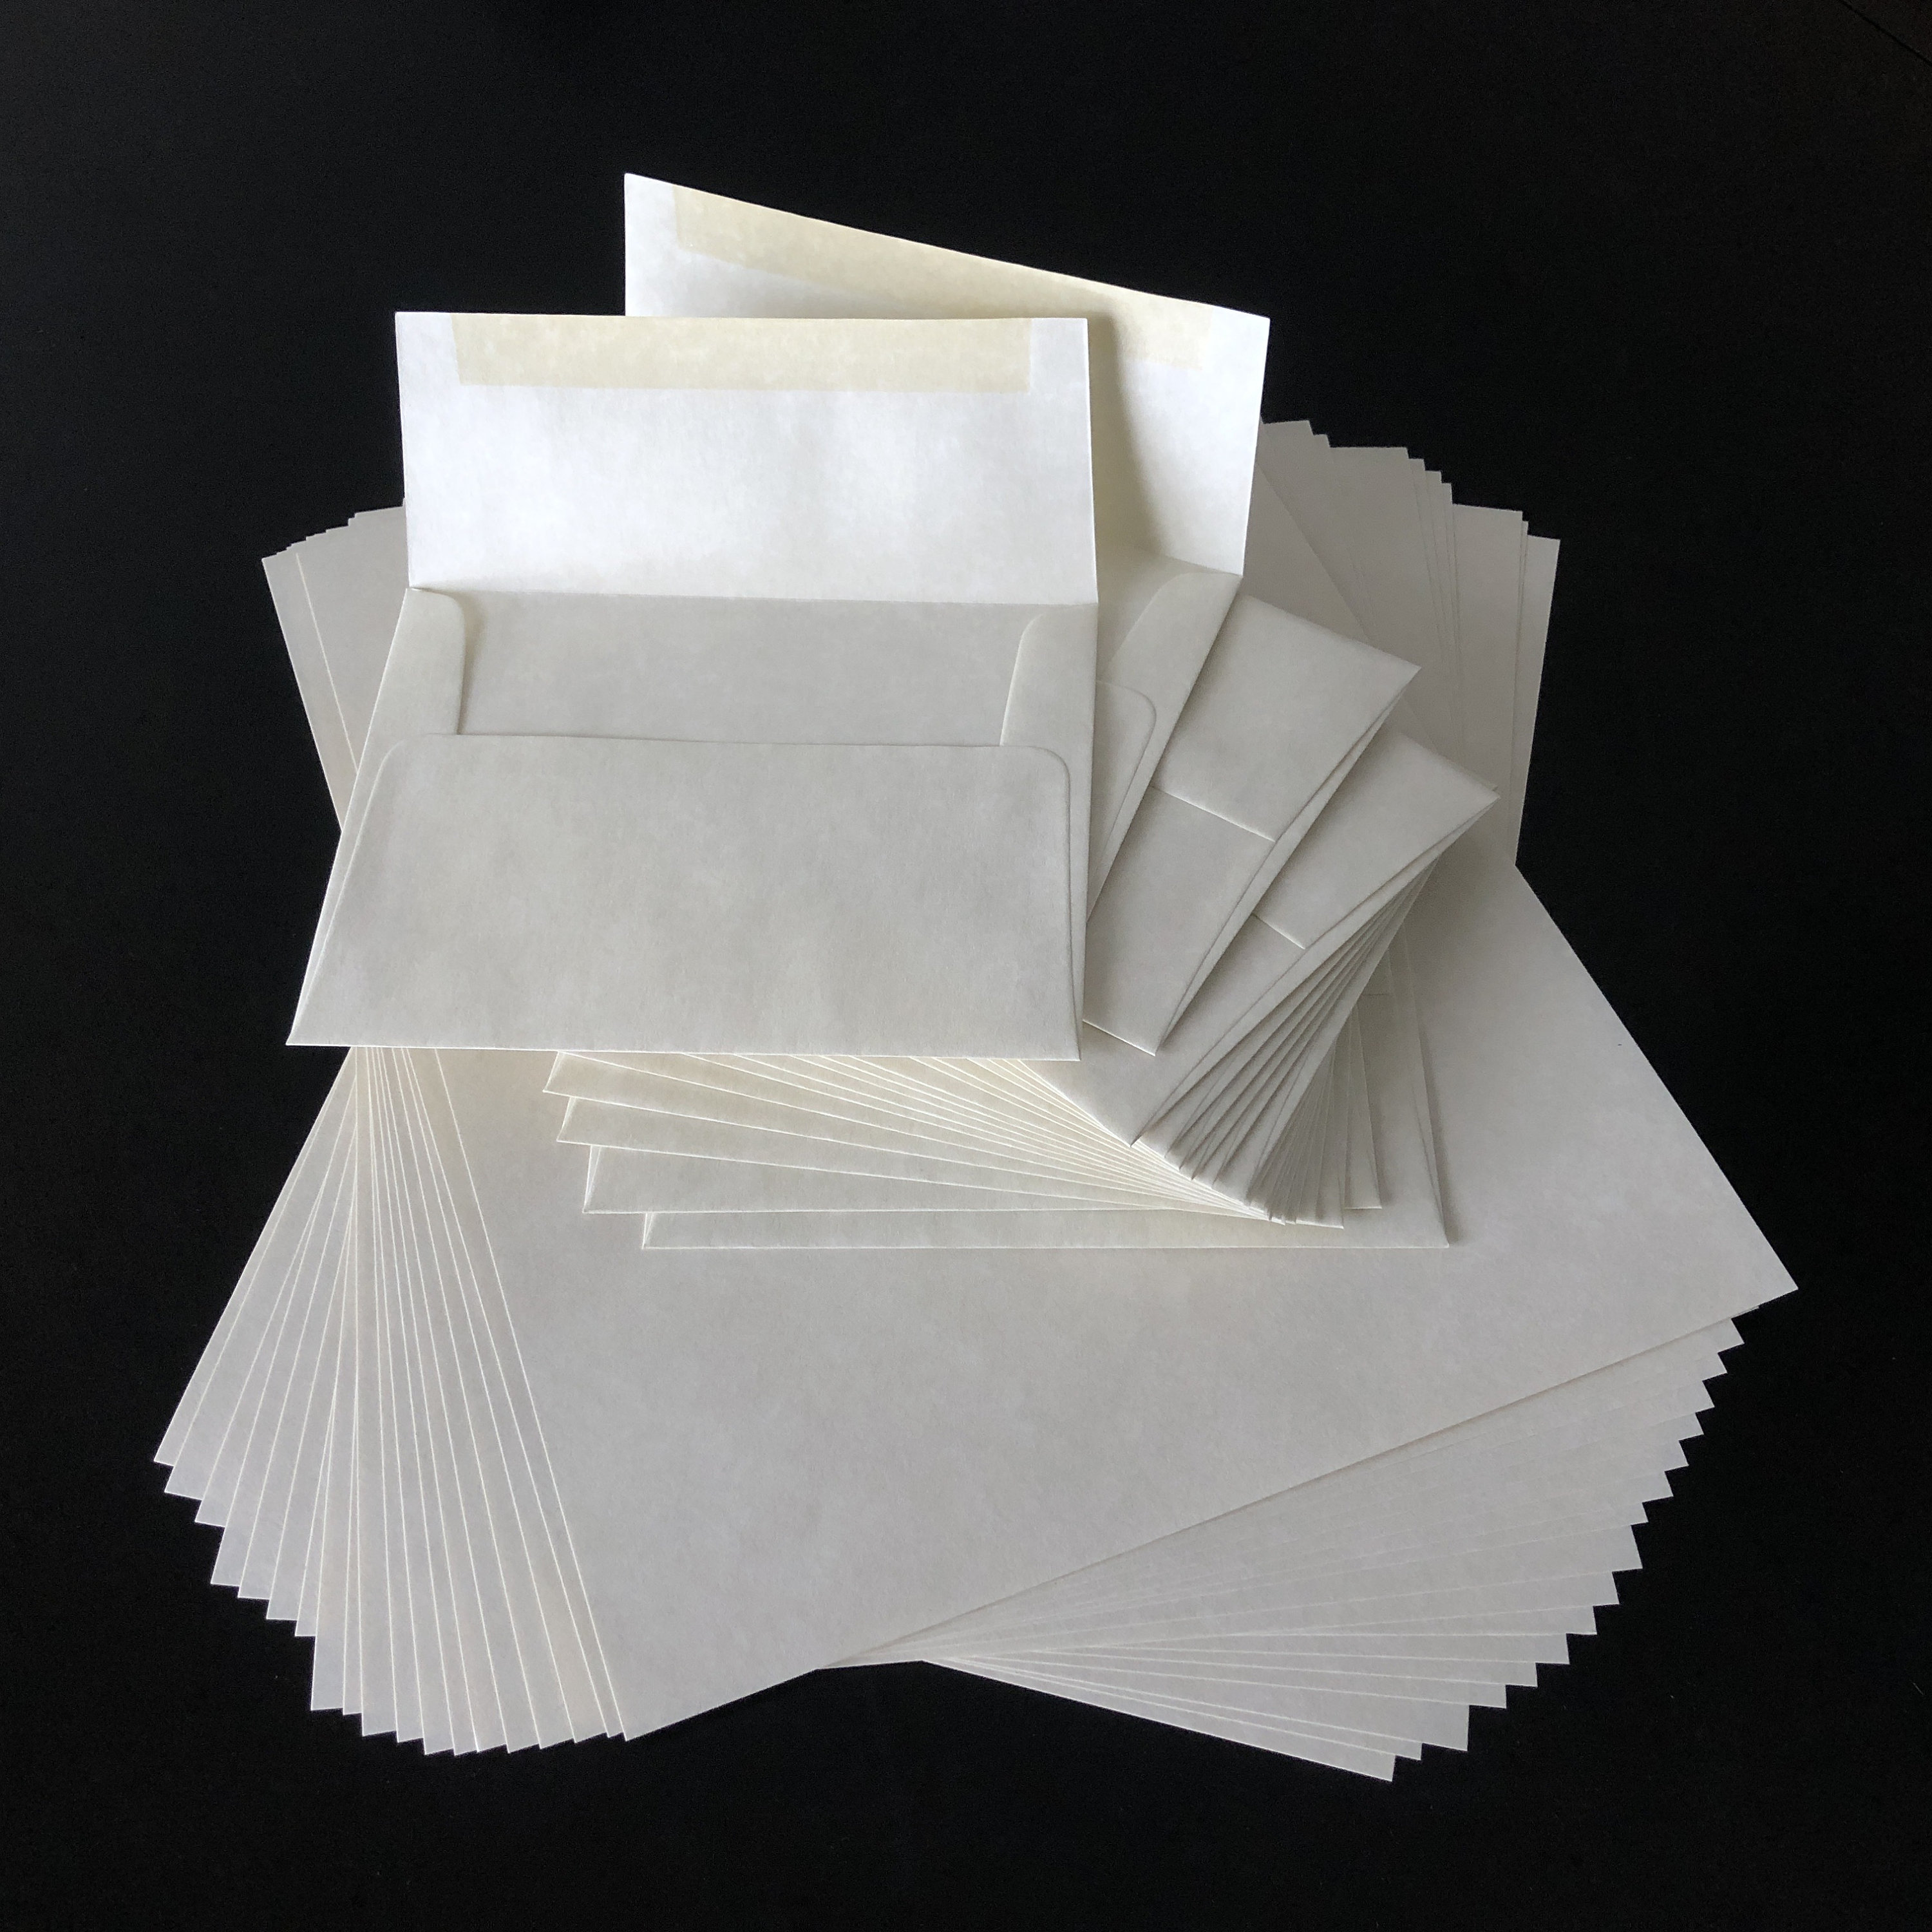 Blank Paper and Envelopes Parchment Stationery for Thank You, Greeting,  Note Cards, Wedding, Graduation Invitations, 20 Sets 40 Pieces 